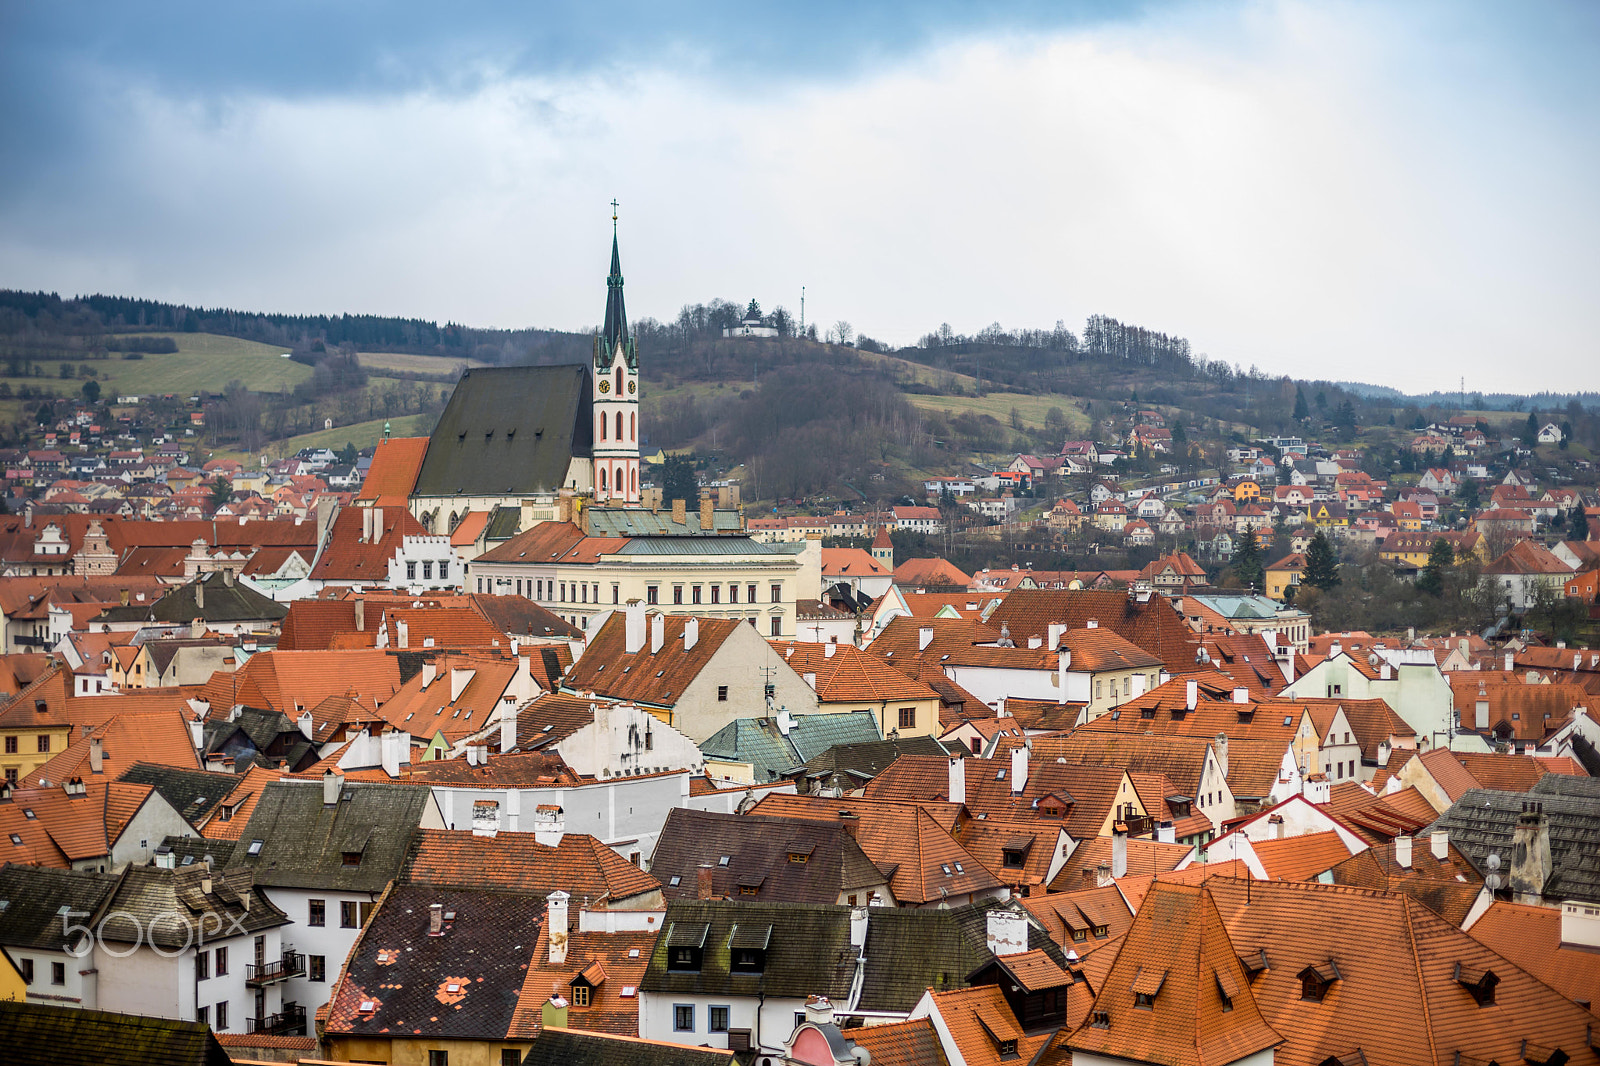 Sony a7 II sample photo. The old town view from cesky krumlov castle in cloudy day photography